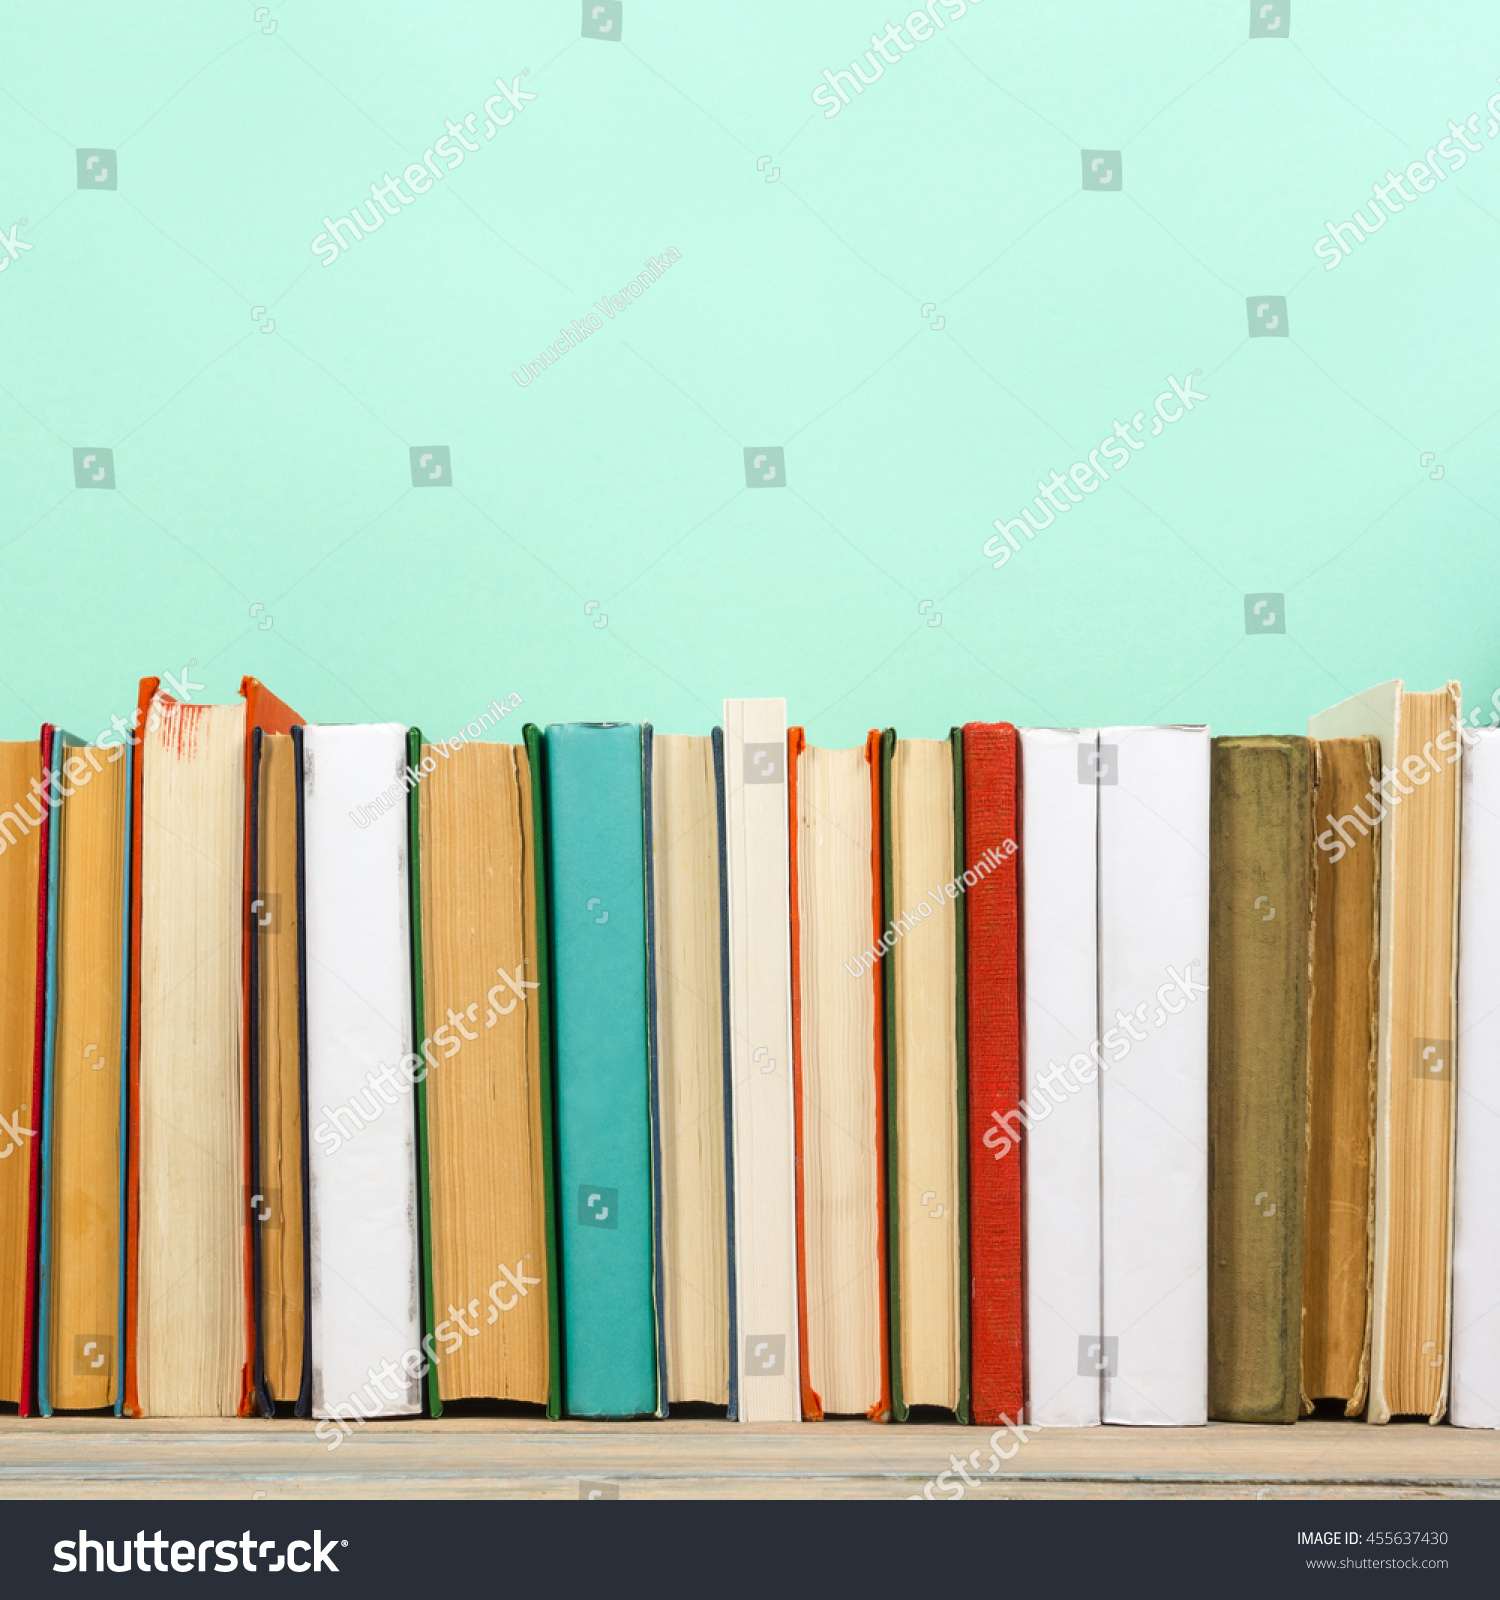 Stack of colorful books, mint green background, free copy space Vintage old hardback books on wooden shelf on the deck table, no labels, blank spine. Back to school. Education green background #455637430